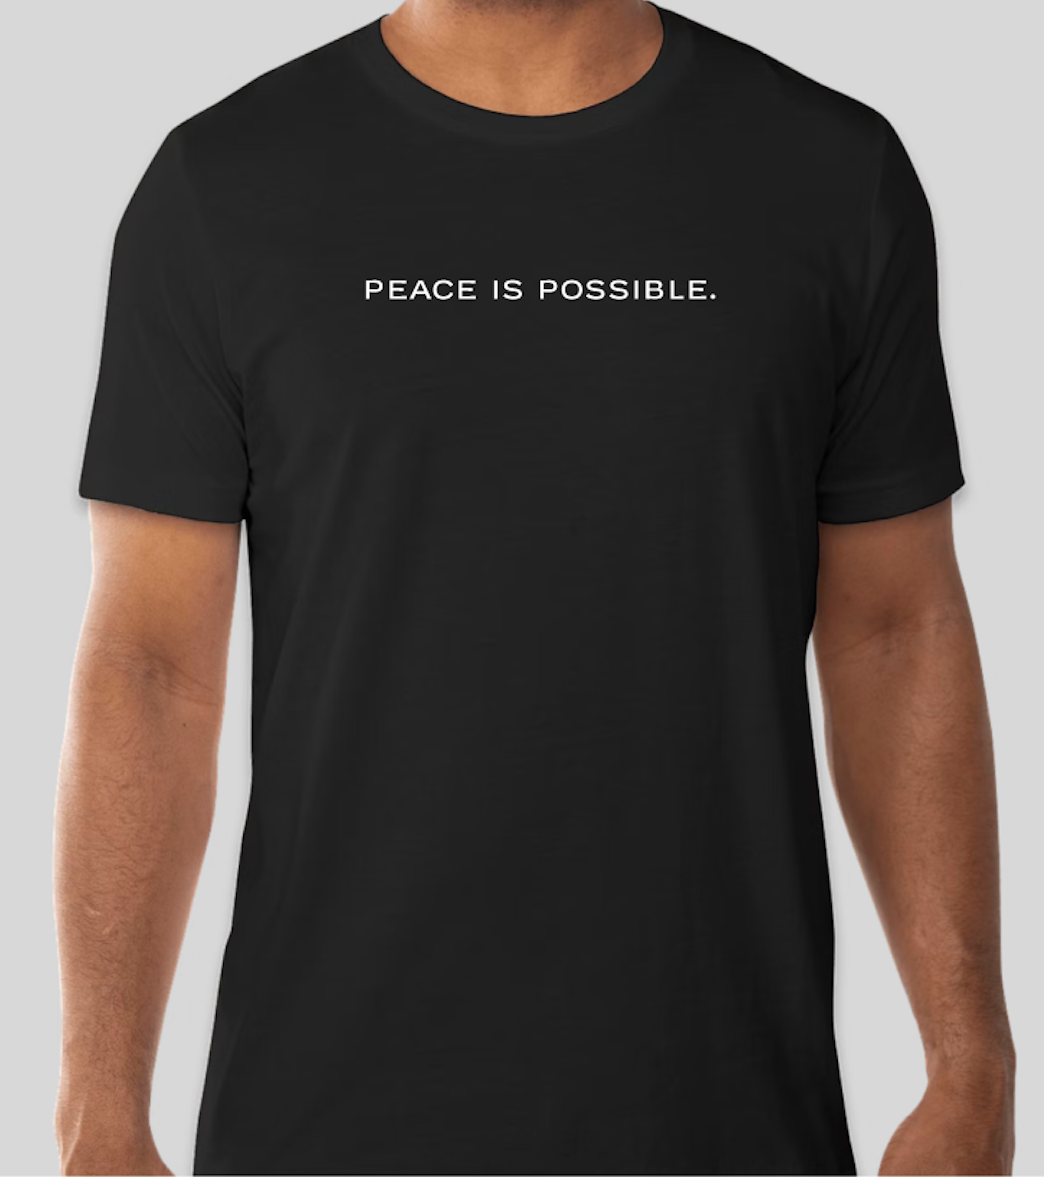 "Peace is Possible" Tee